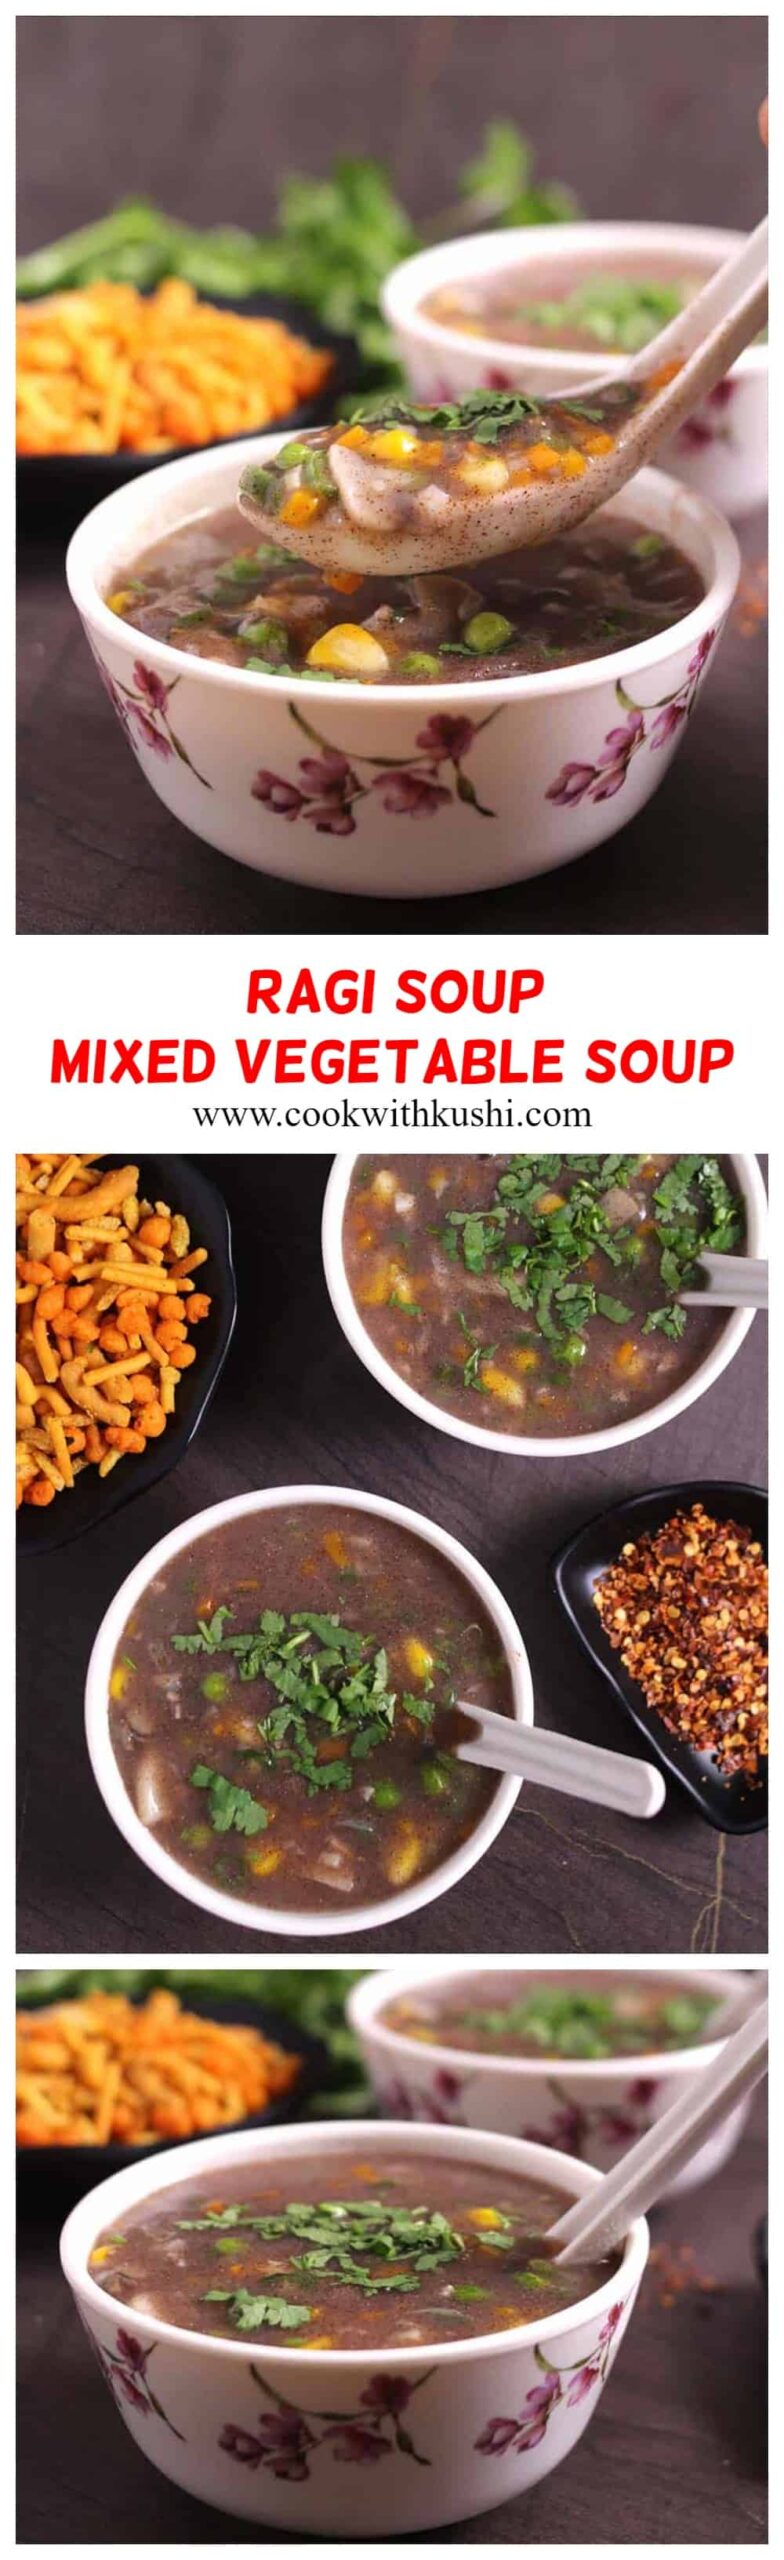 How to make a healthy mixed vegetable soup #ragisoup fingermilletsoup